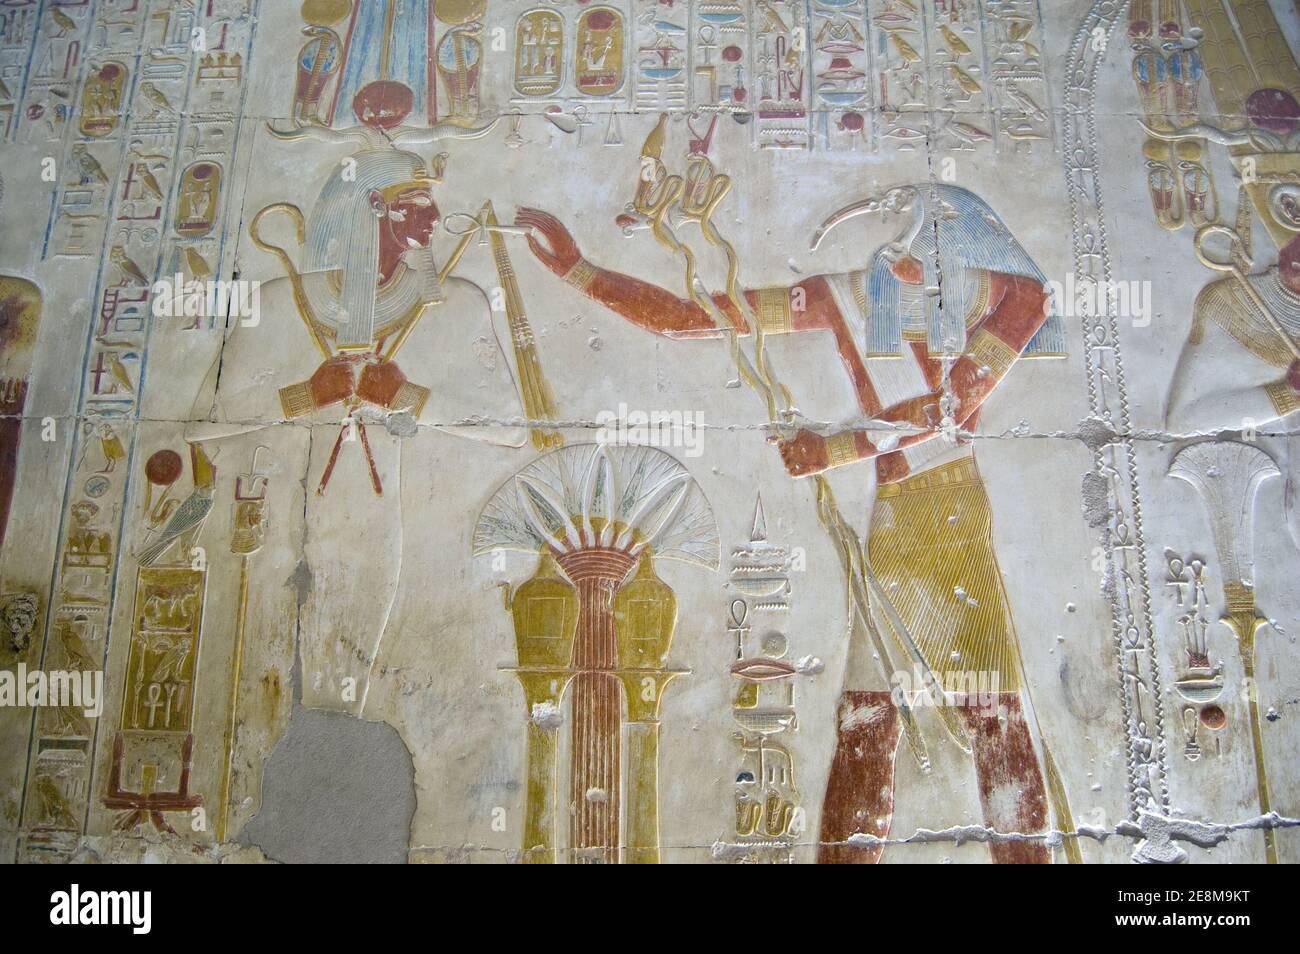 Ancient Egyptian bas relief showing the Ibis headed god Thoth praising god of the dead Osiris. Wall at Abydos Temple, el Balyana, Egypt. Ancient carvi Stock Photo